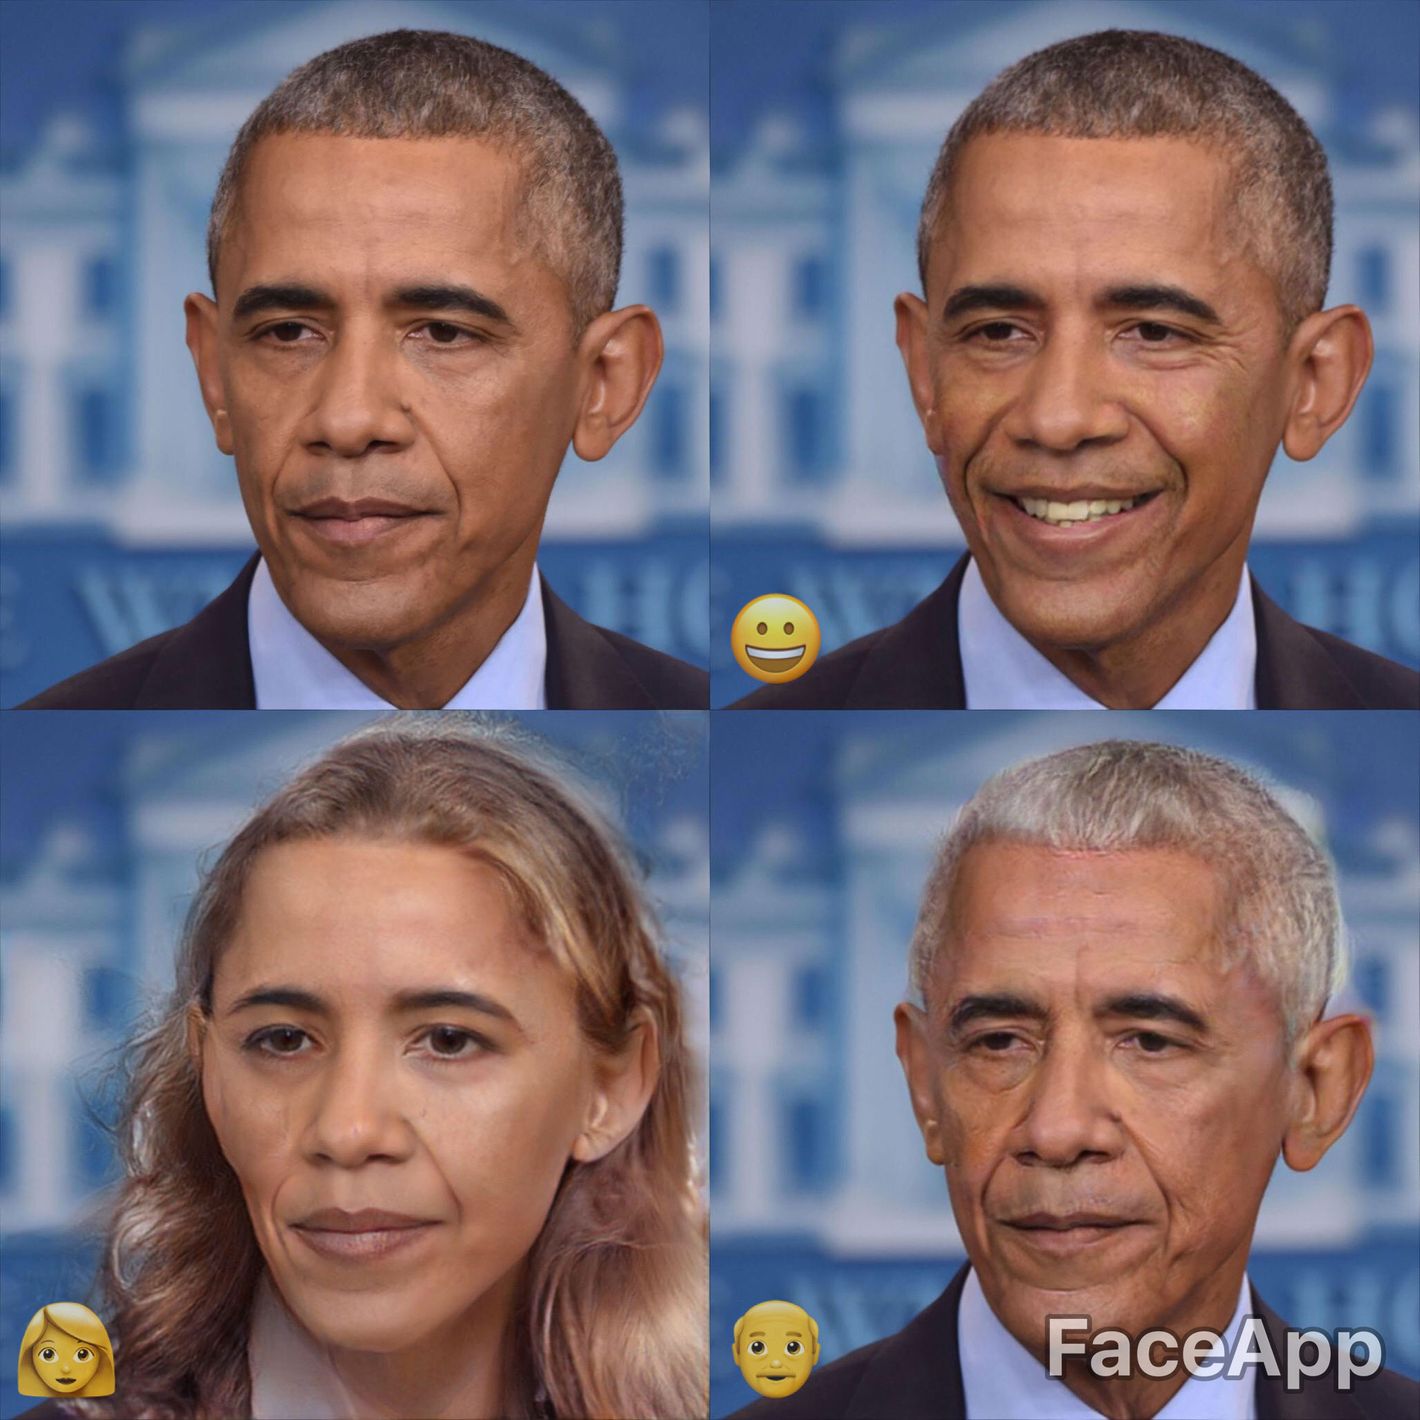 How to Use FaceApp Morphing App That Makes You Smile